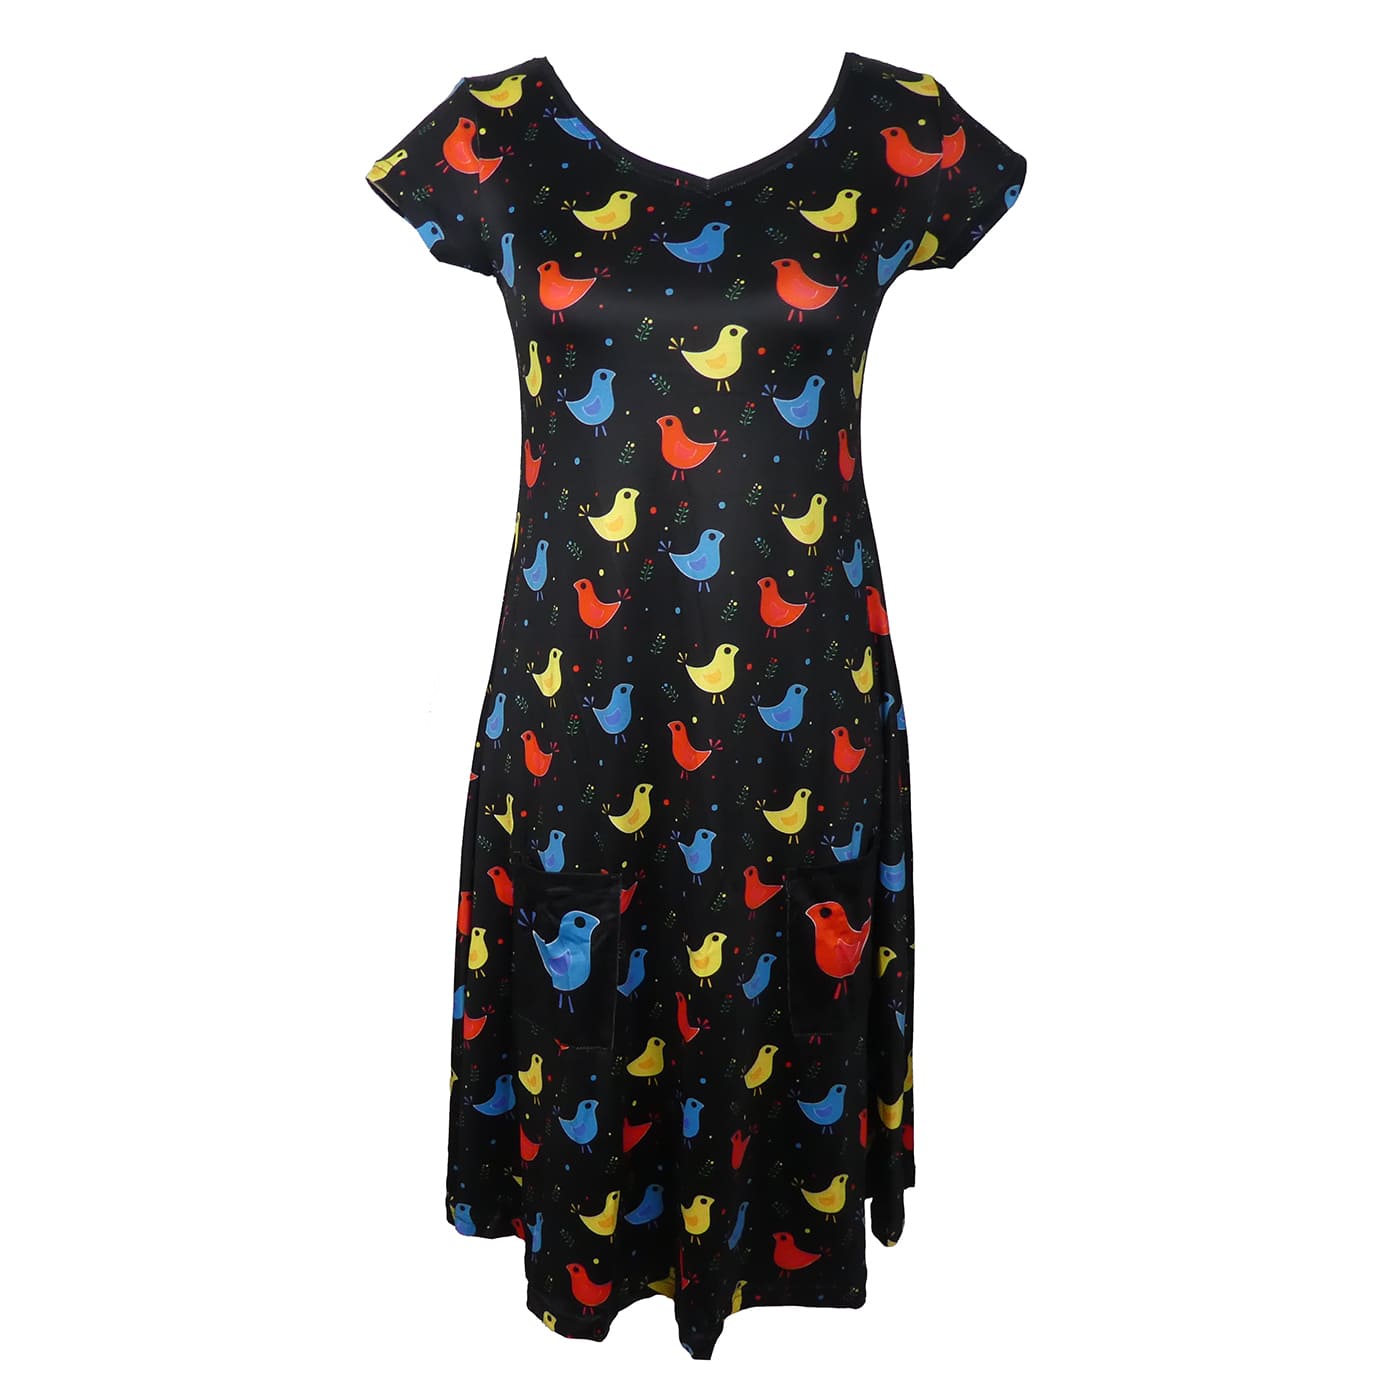 Chirp Tunic Dress by RainbowsAndFairies.com.au (Cute Birds - Partridge Family Inspired - Kitsch - Dress With Pockets - Mod - Vintage Inspired) - SKU: CL_TUNDR_CHIRP_ORG - Pic-01